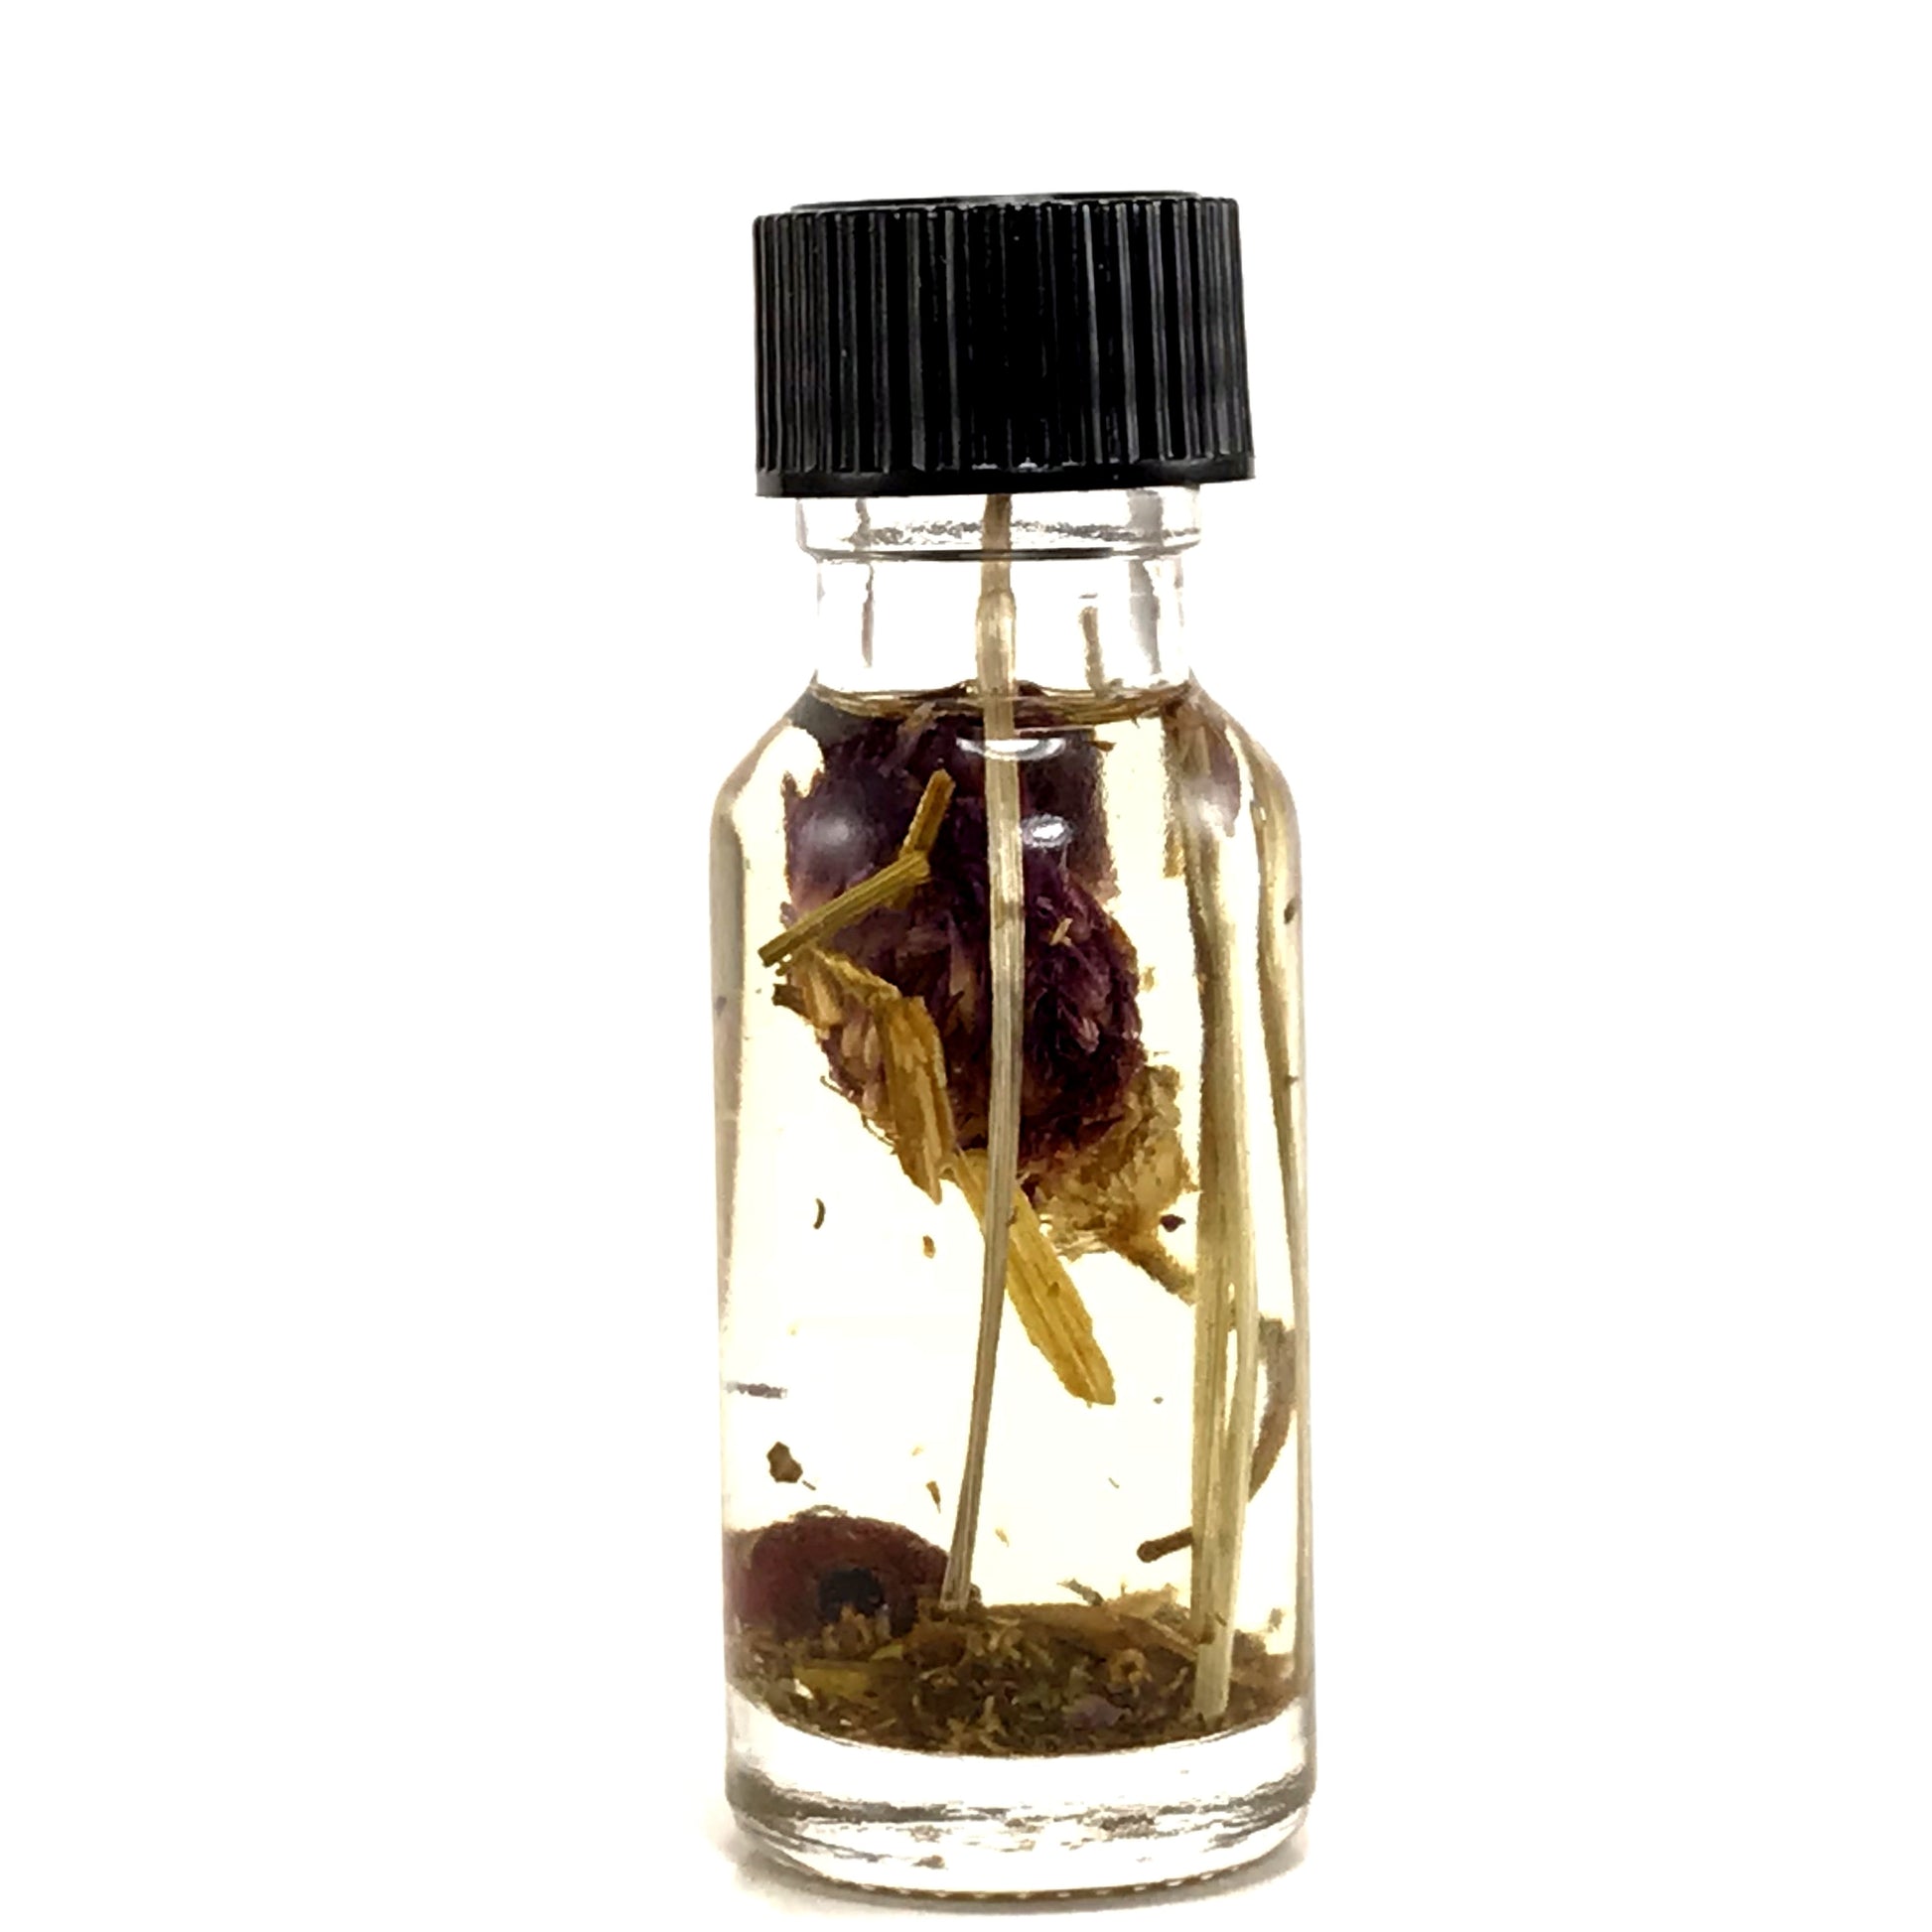 Twichery Earth Elemental Conjure Oil is for grounding, stability. root, art, craft